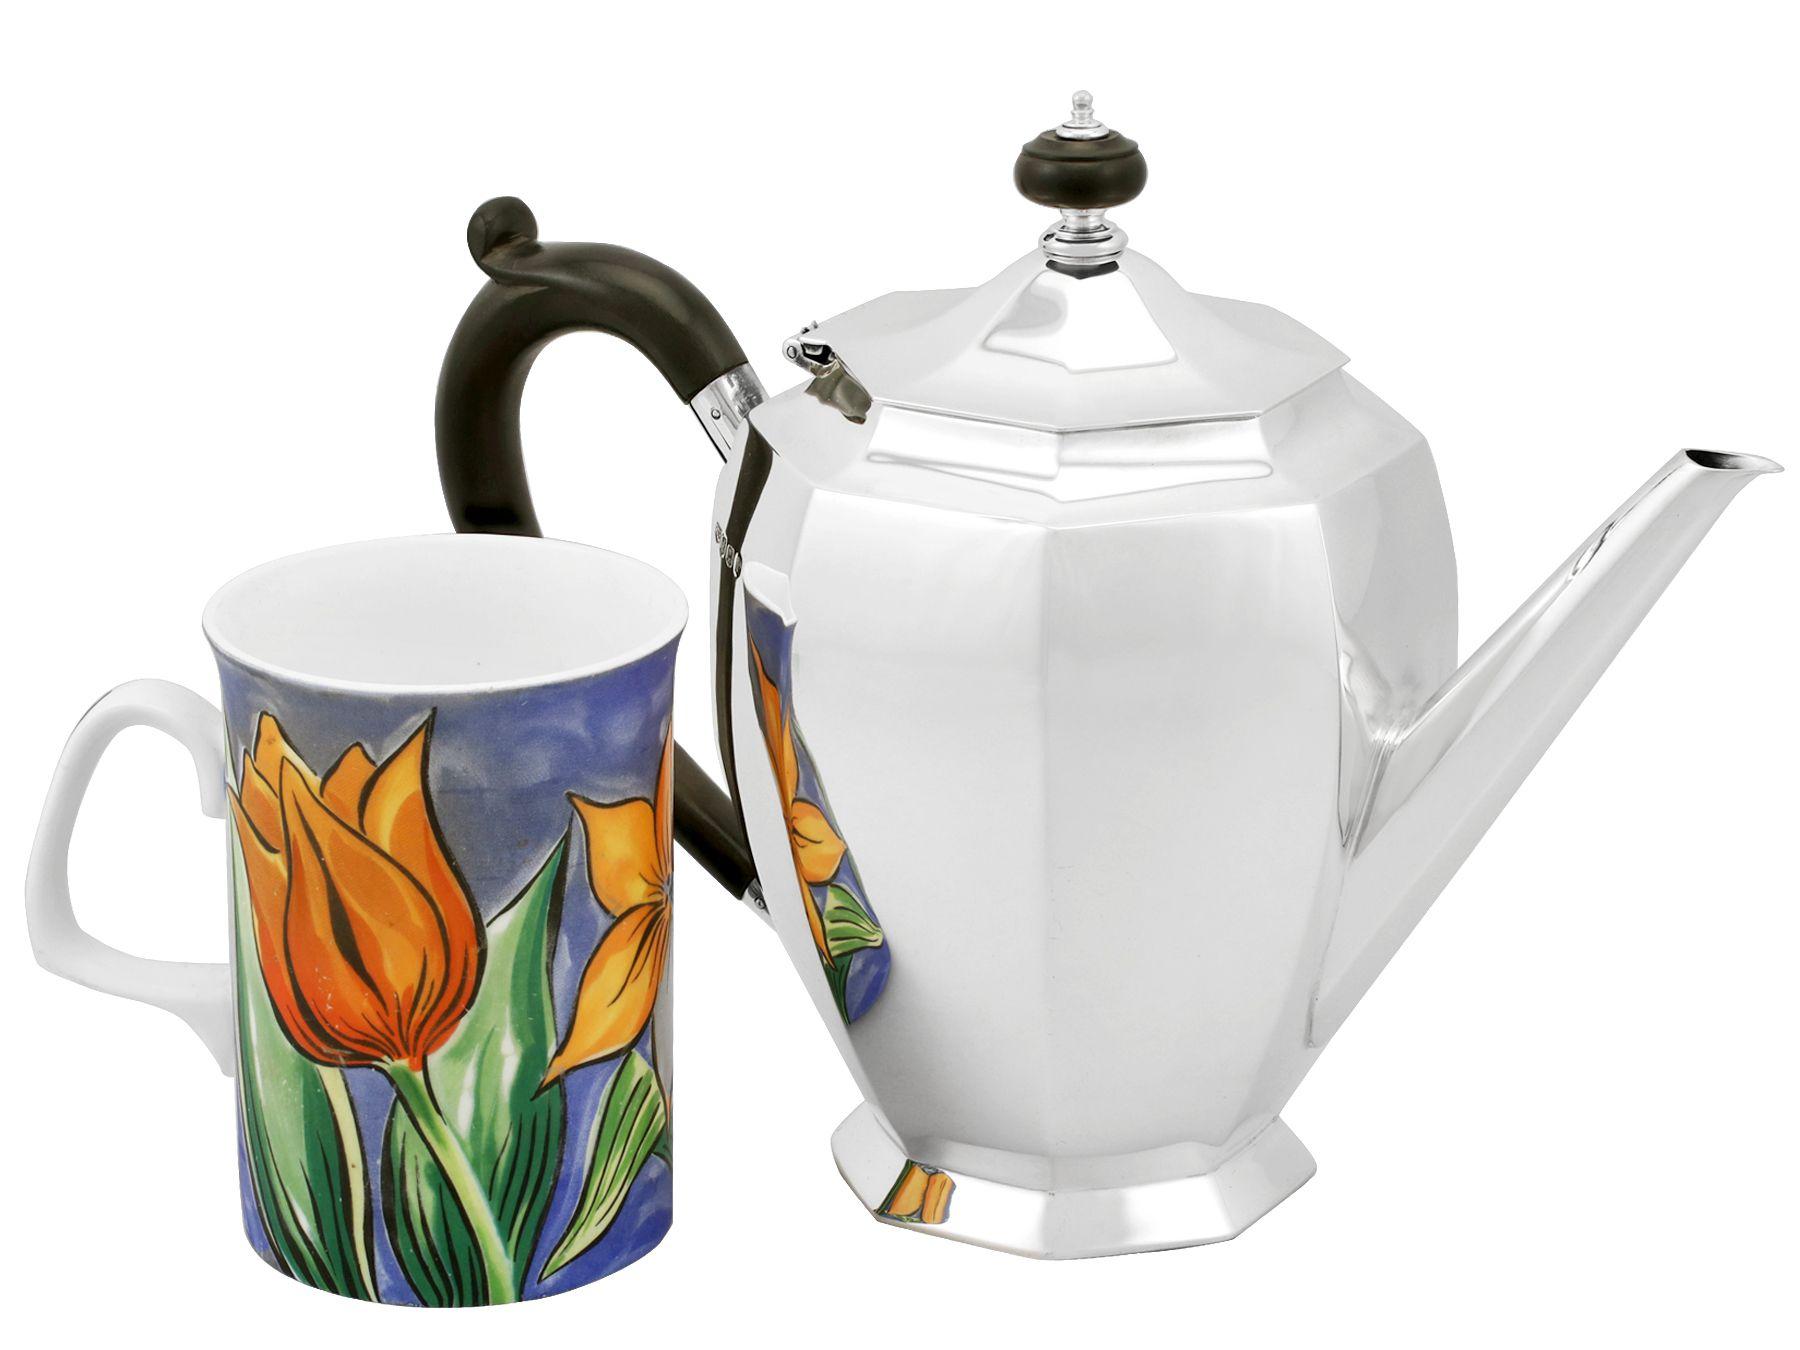 british silverware limited teapots for sale